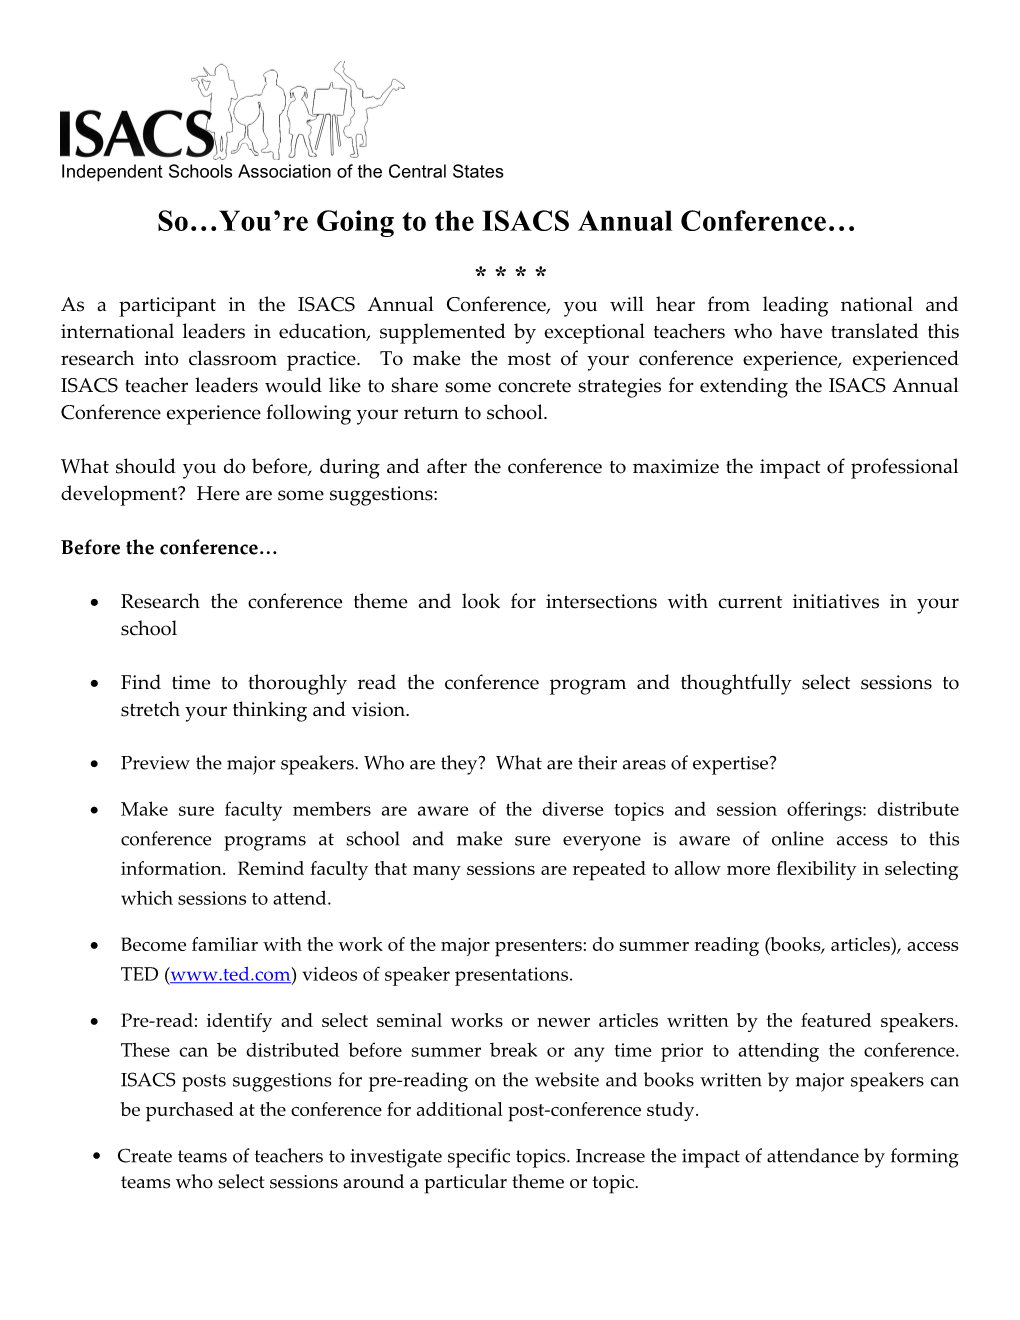 So You Re Going to the ISACS Annual Conference